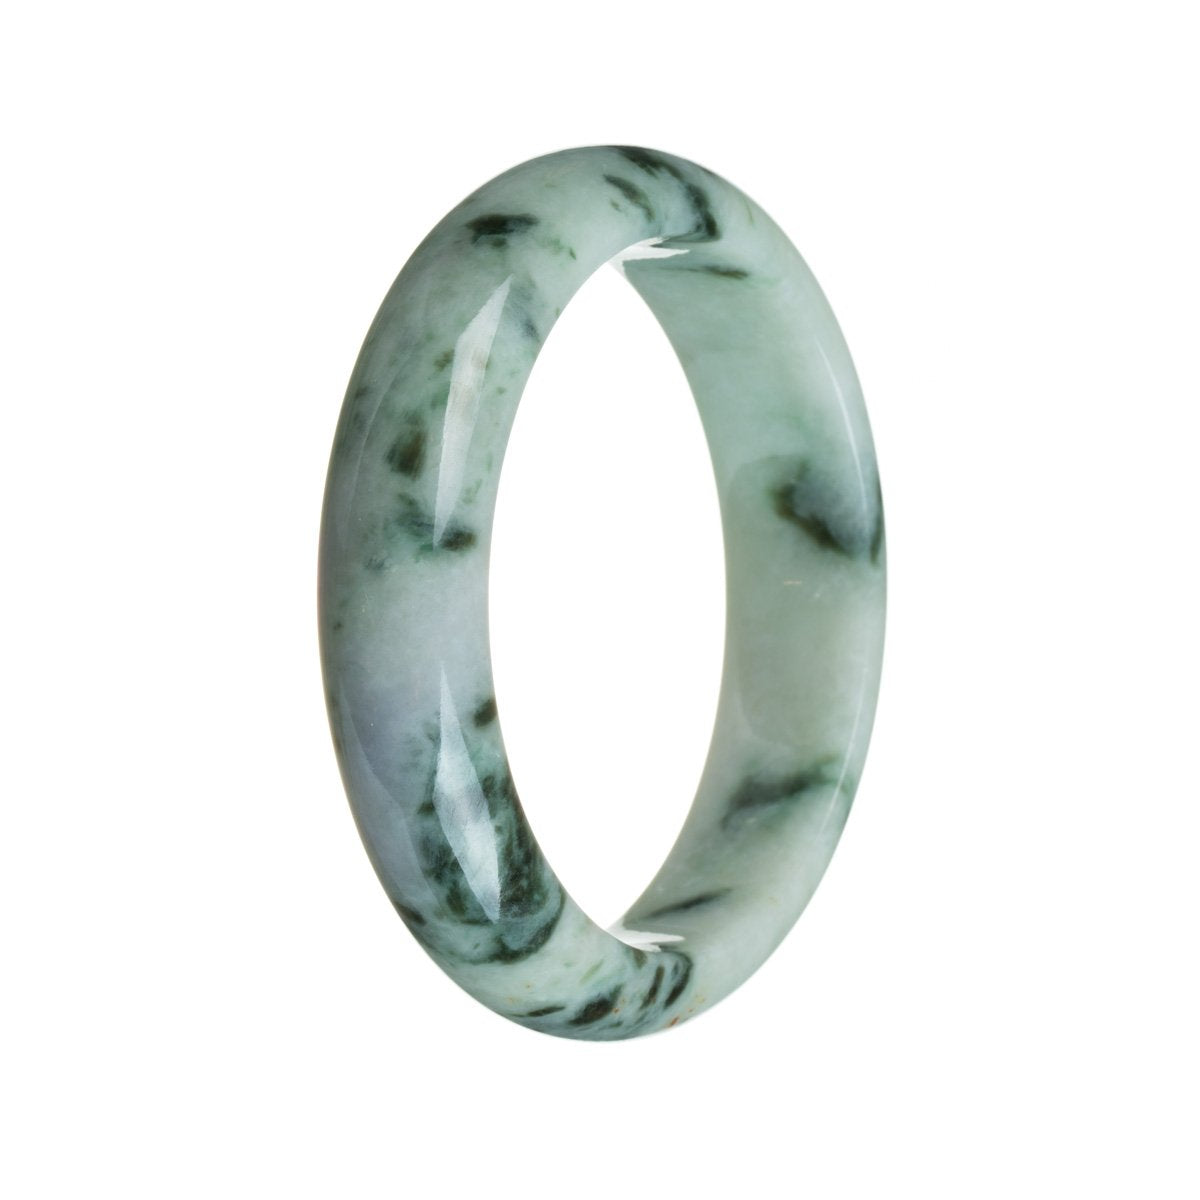 A pale green Burma Jade bangle with a certified Grade A quality. The bangle features a beautiful pattern and has a unique half moon shape, measuring 59mm in size. Designed and crafted by MAYS™.